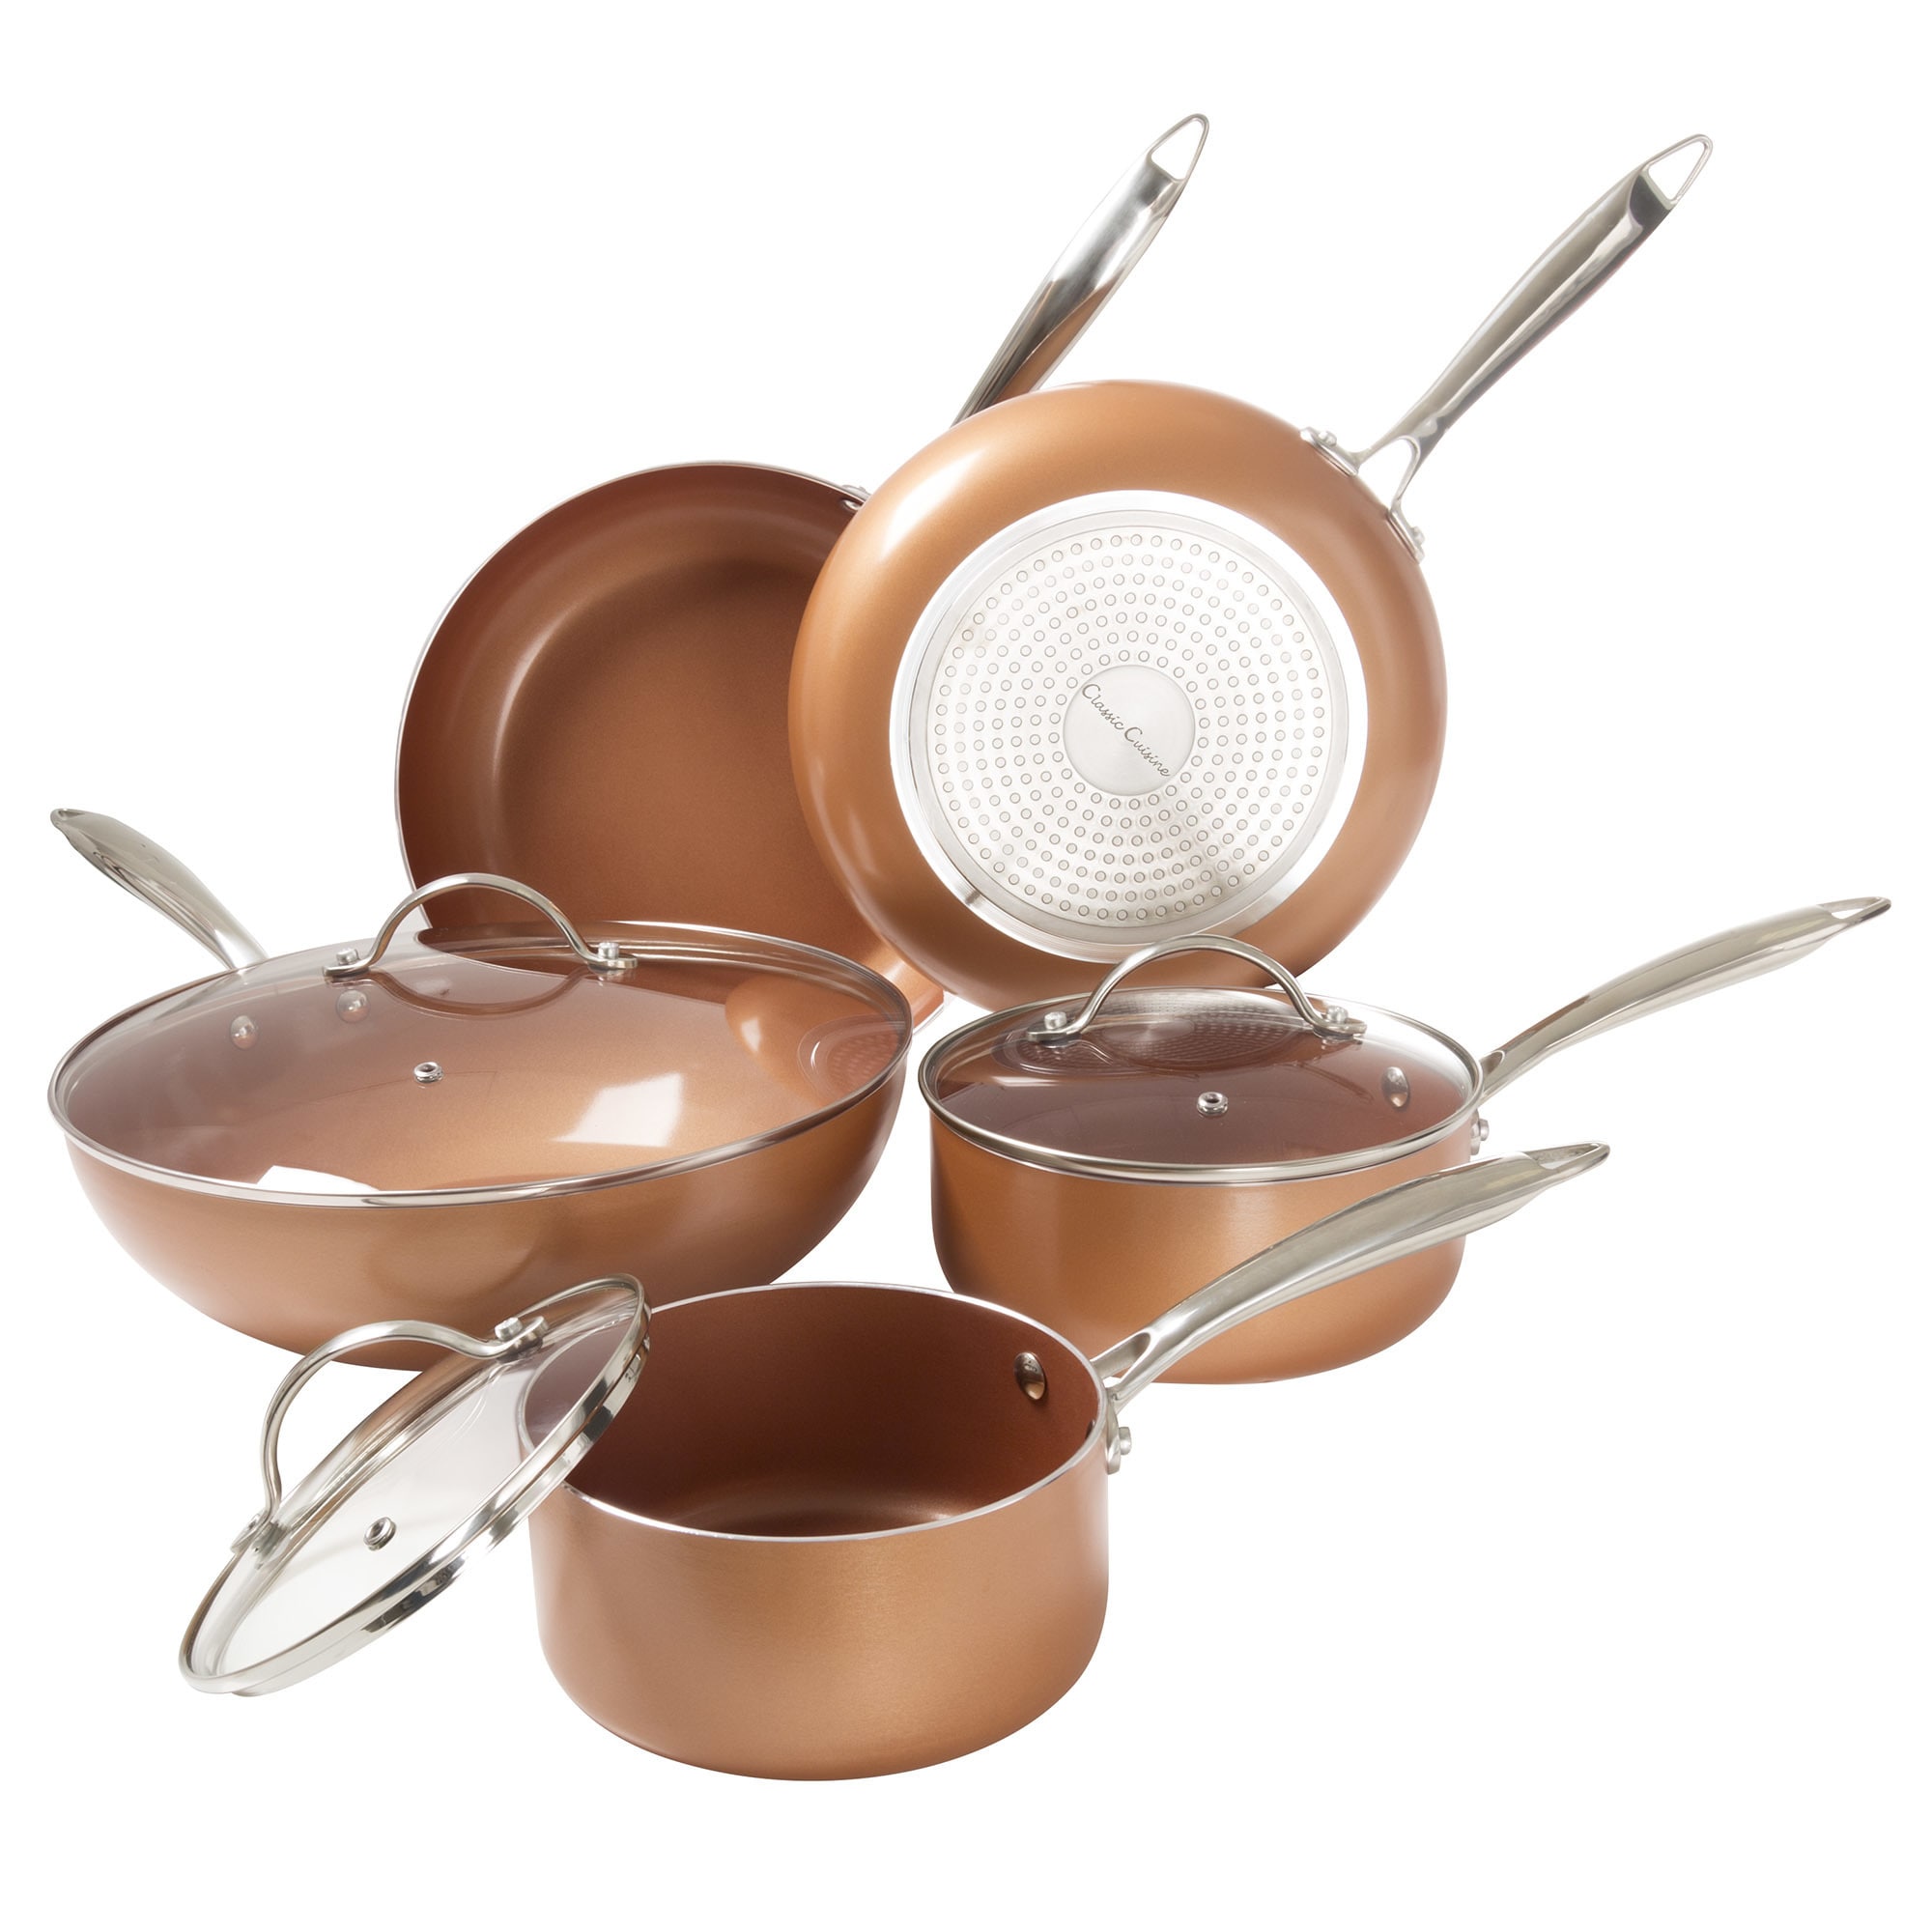  Thyme & Table 12-Piece Nonstick Ceramic Cookware Set, Rose  Gold/Ideal for cooking exquisite dishes/Mom needs it/Ideal product for  Chef/This product should not be missing in your home.: Home & Kitchen